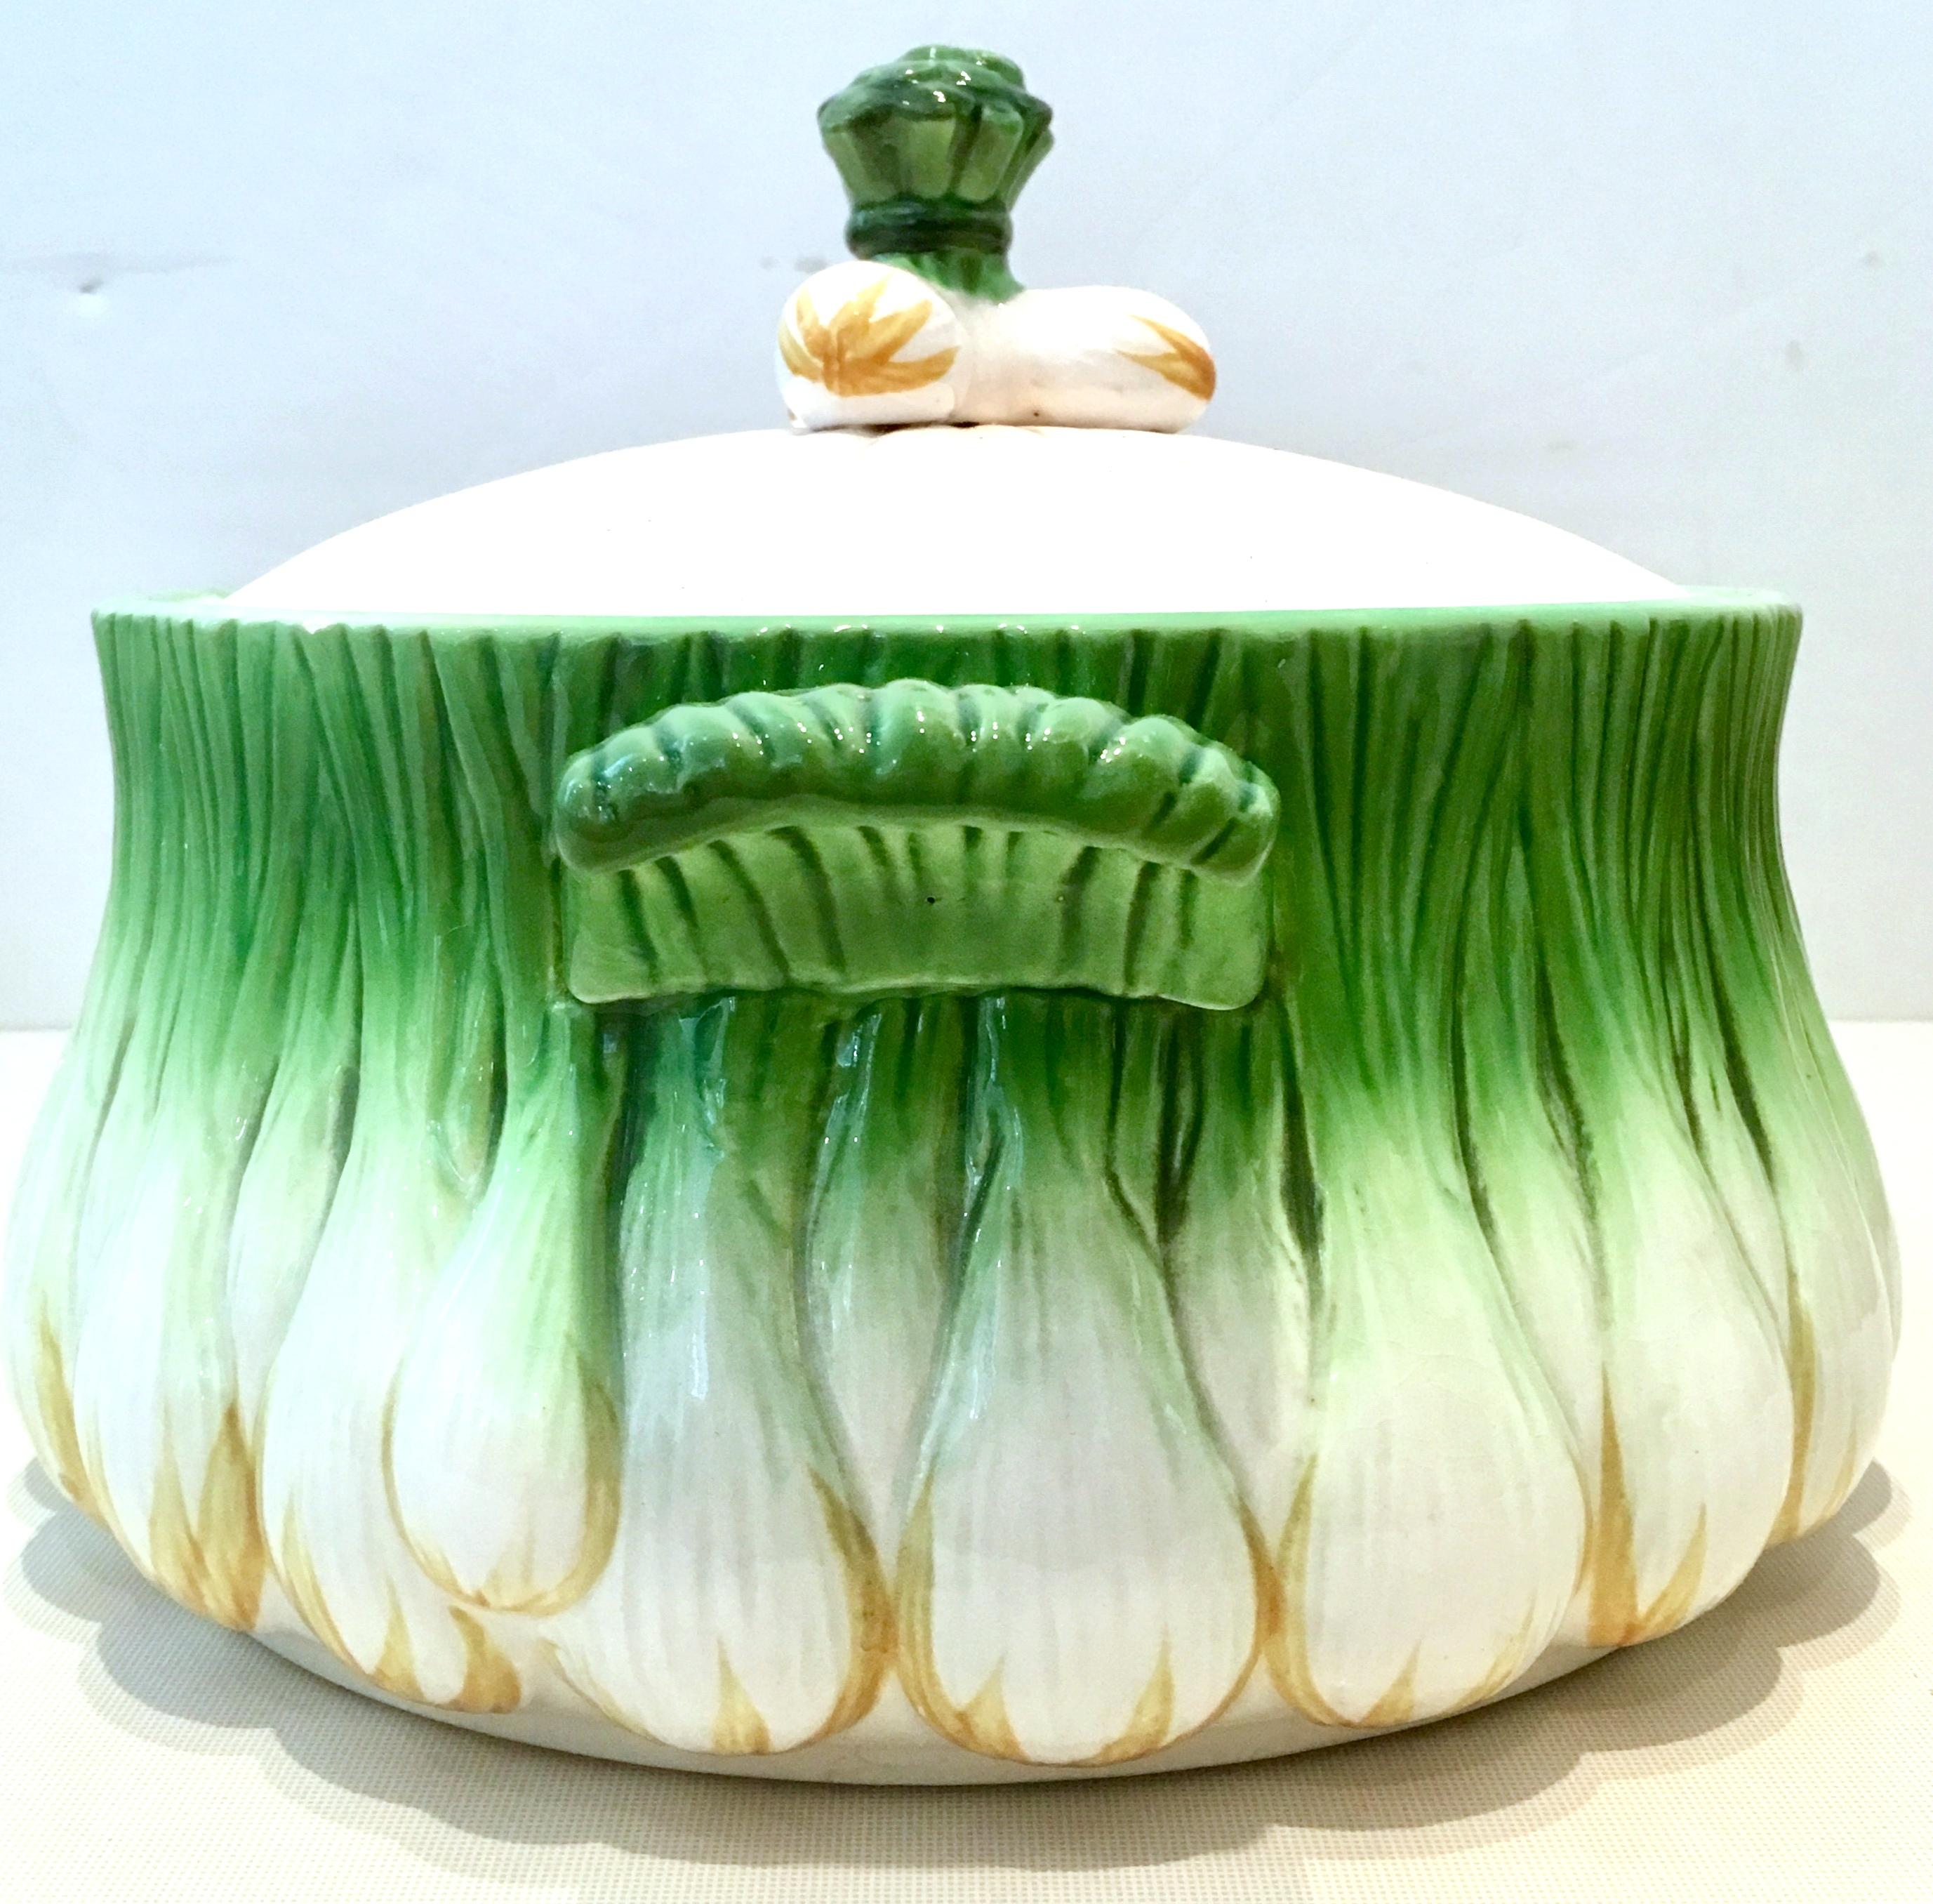 20th century Georges Briard ceramic glaze hand painted lidded vegetable server. This rare and coveted large 12